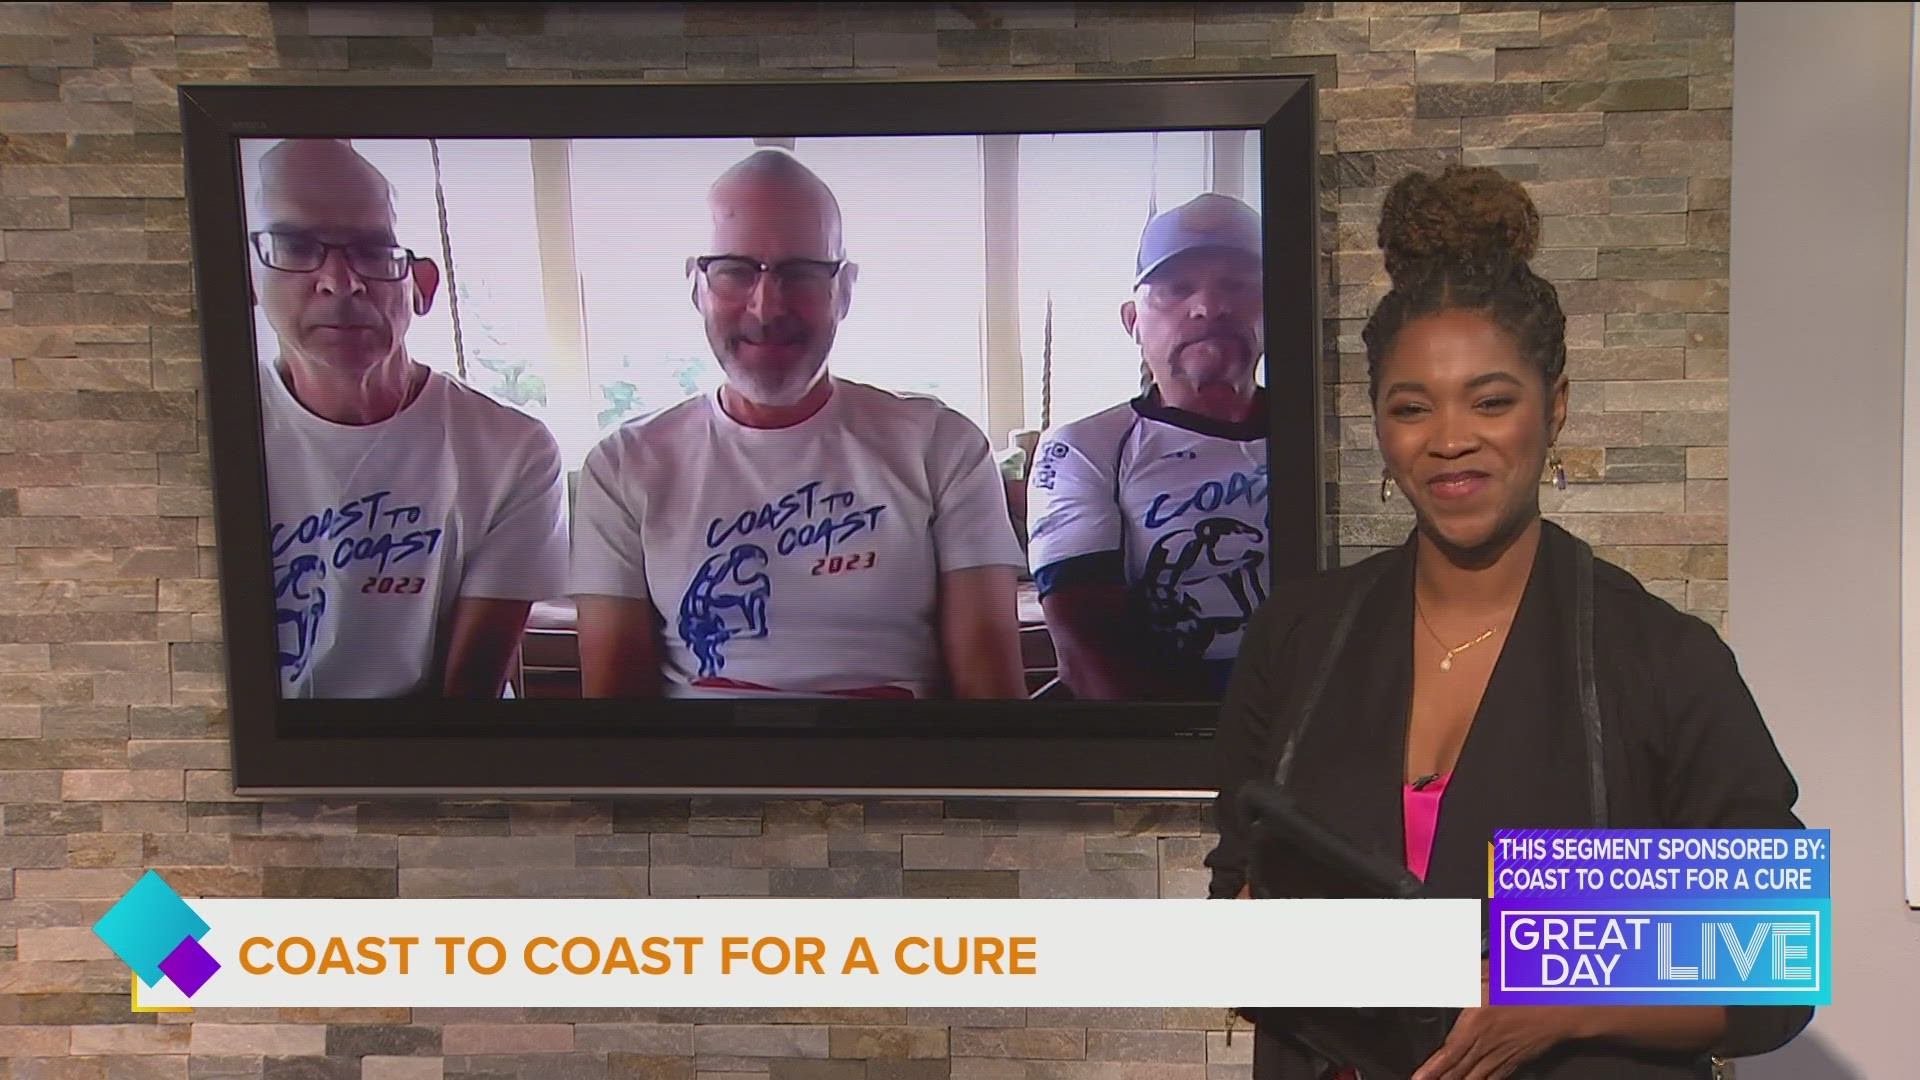 Three cyclists from Ohio biked across the country to raise more than $100,000 for the Leukemia and Lymphoma Society.